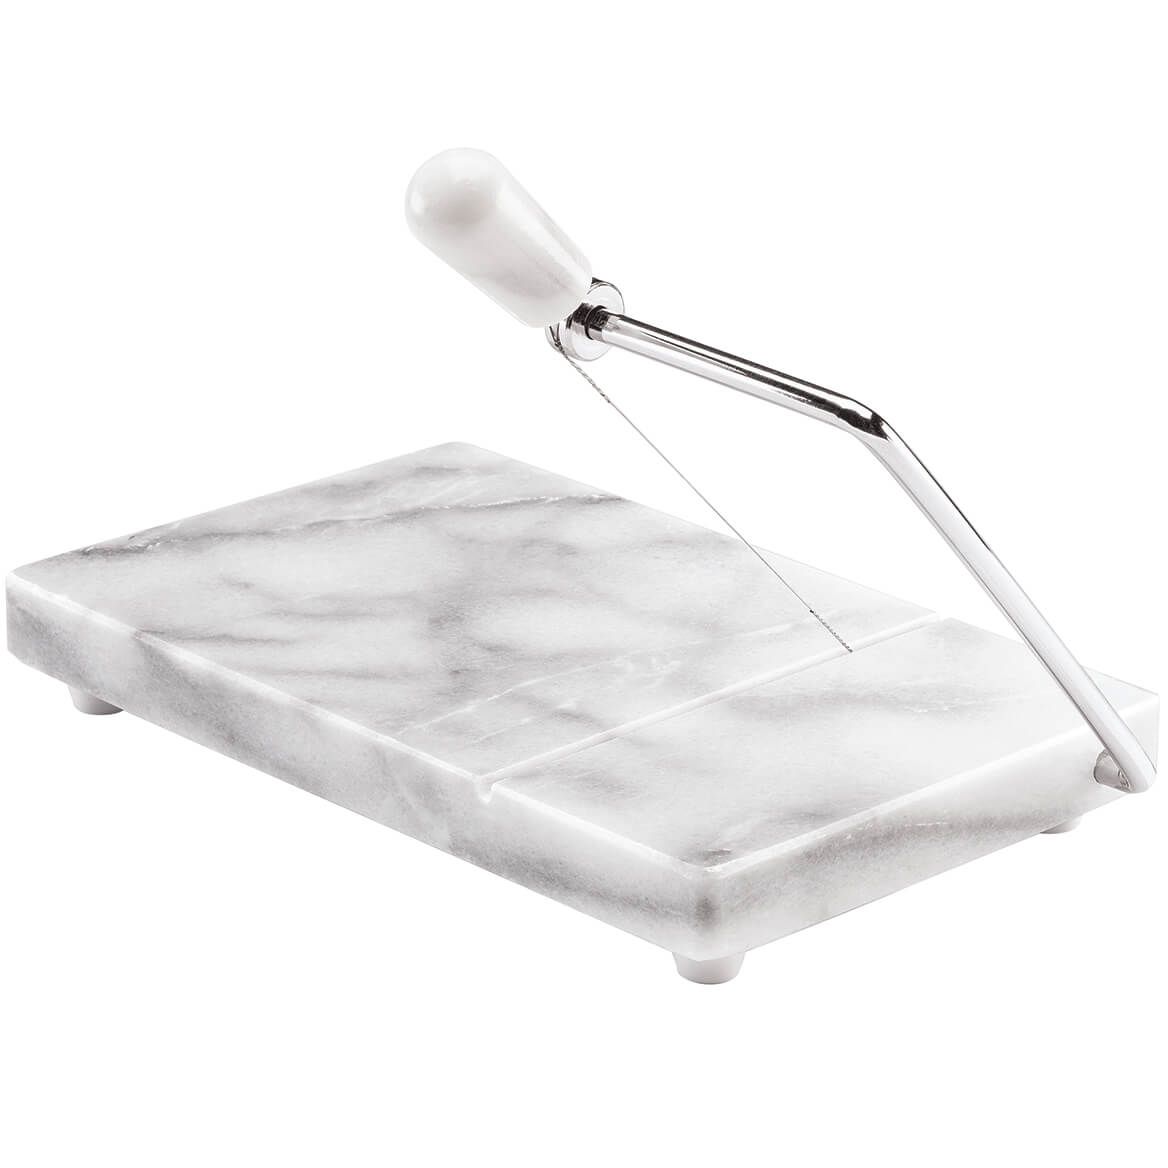 Marble Cheese Slicer + '-' + 317449